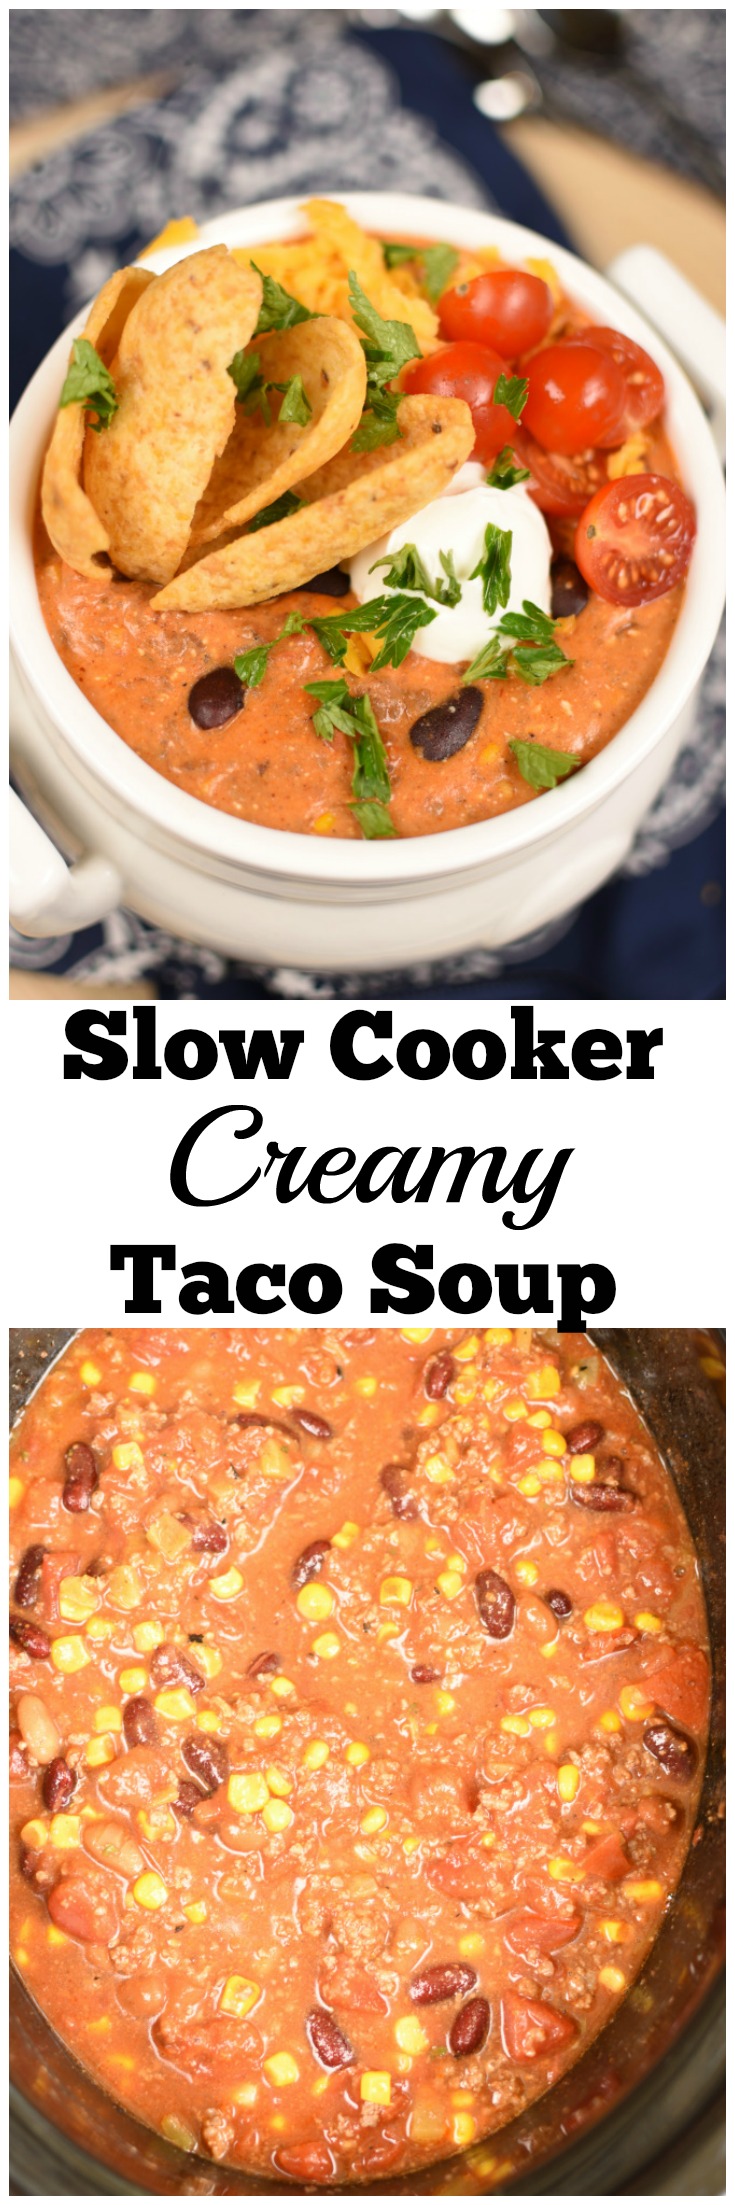 Creamy Taco Soup Slow Cooker Recipe Little Dairy On The Prairie